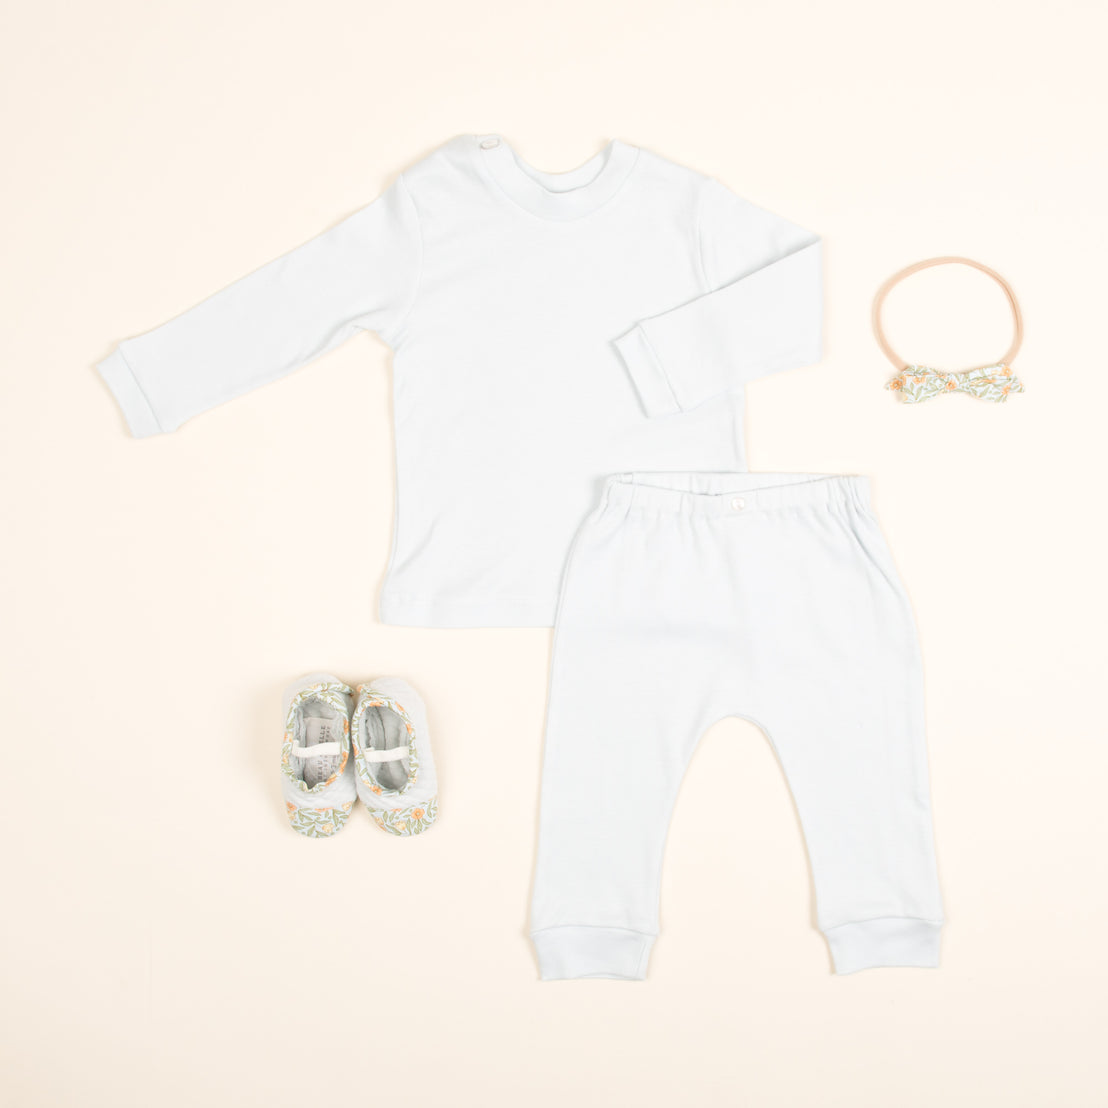 A flat lay of an Aiden Pima Top & Leggings baby outfit on a beige background, featuring a white long-sleeve shirt, light grey pants, matching floral shoes, and a floral headband.